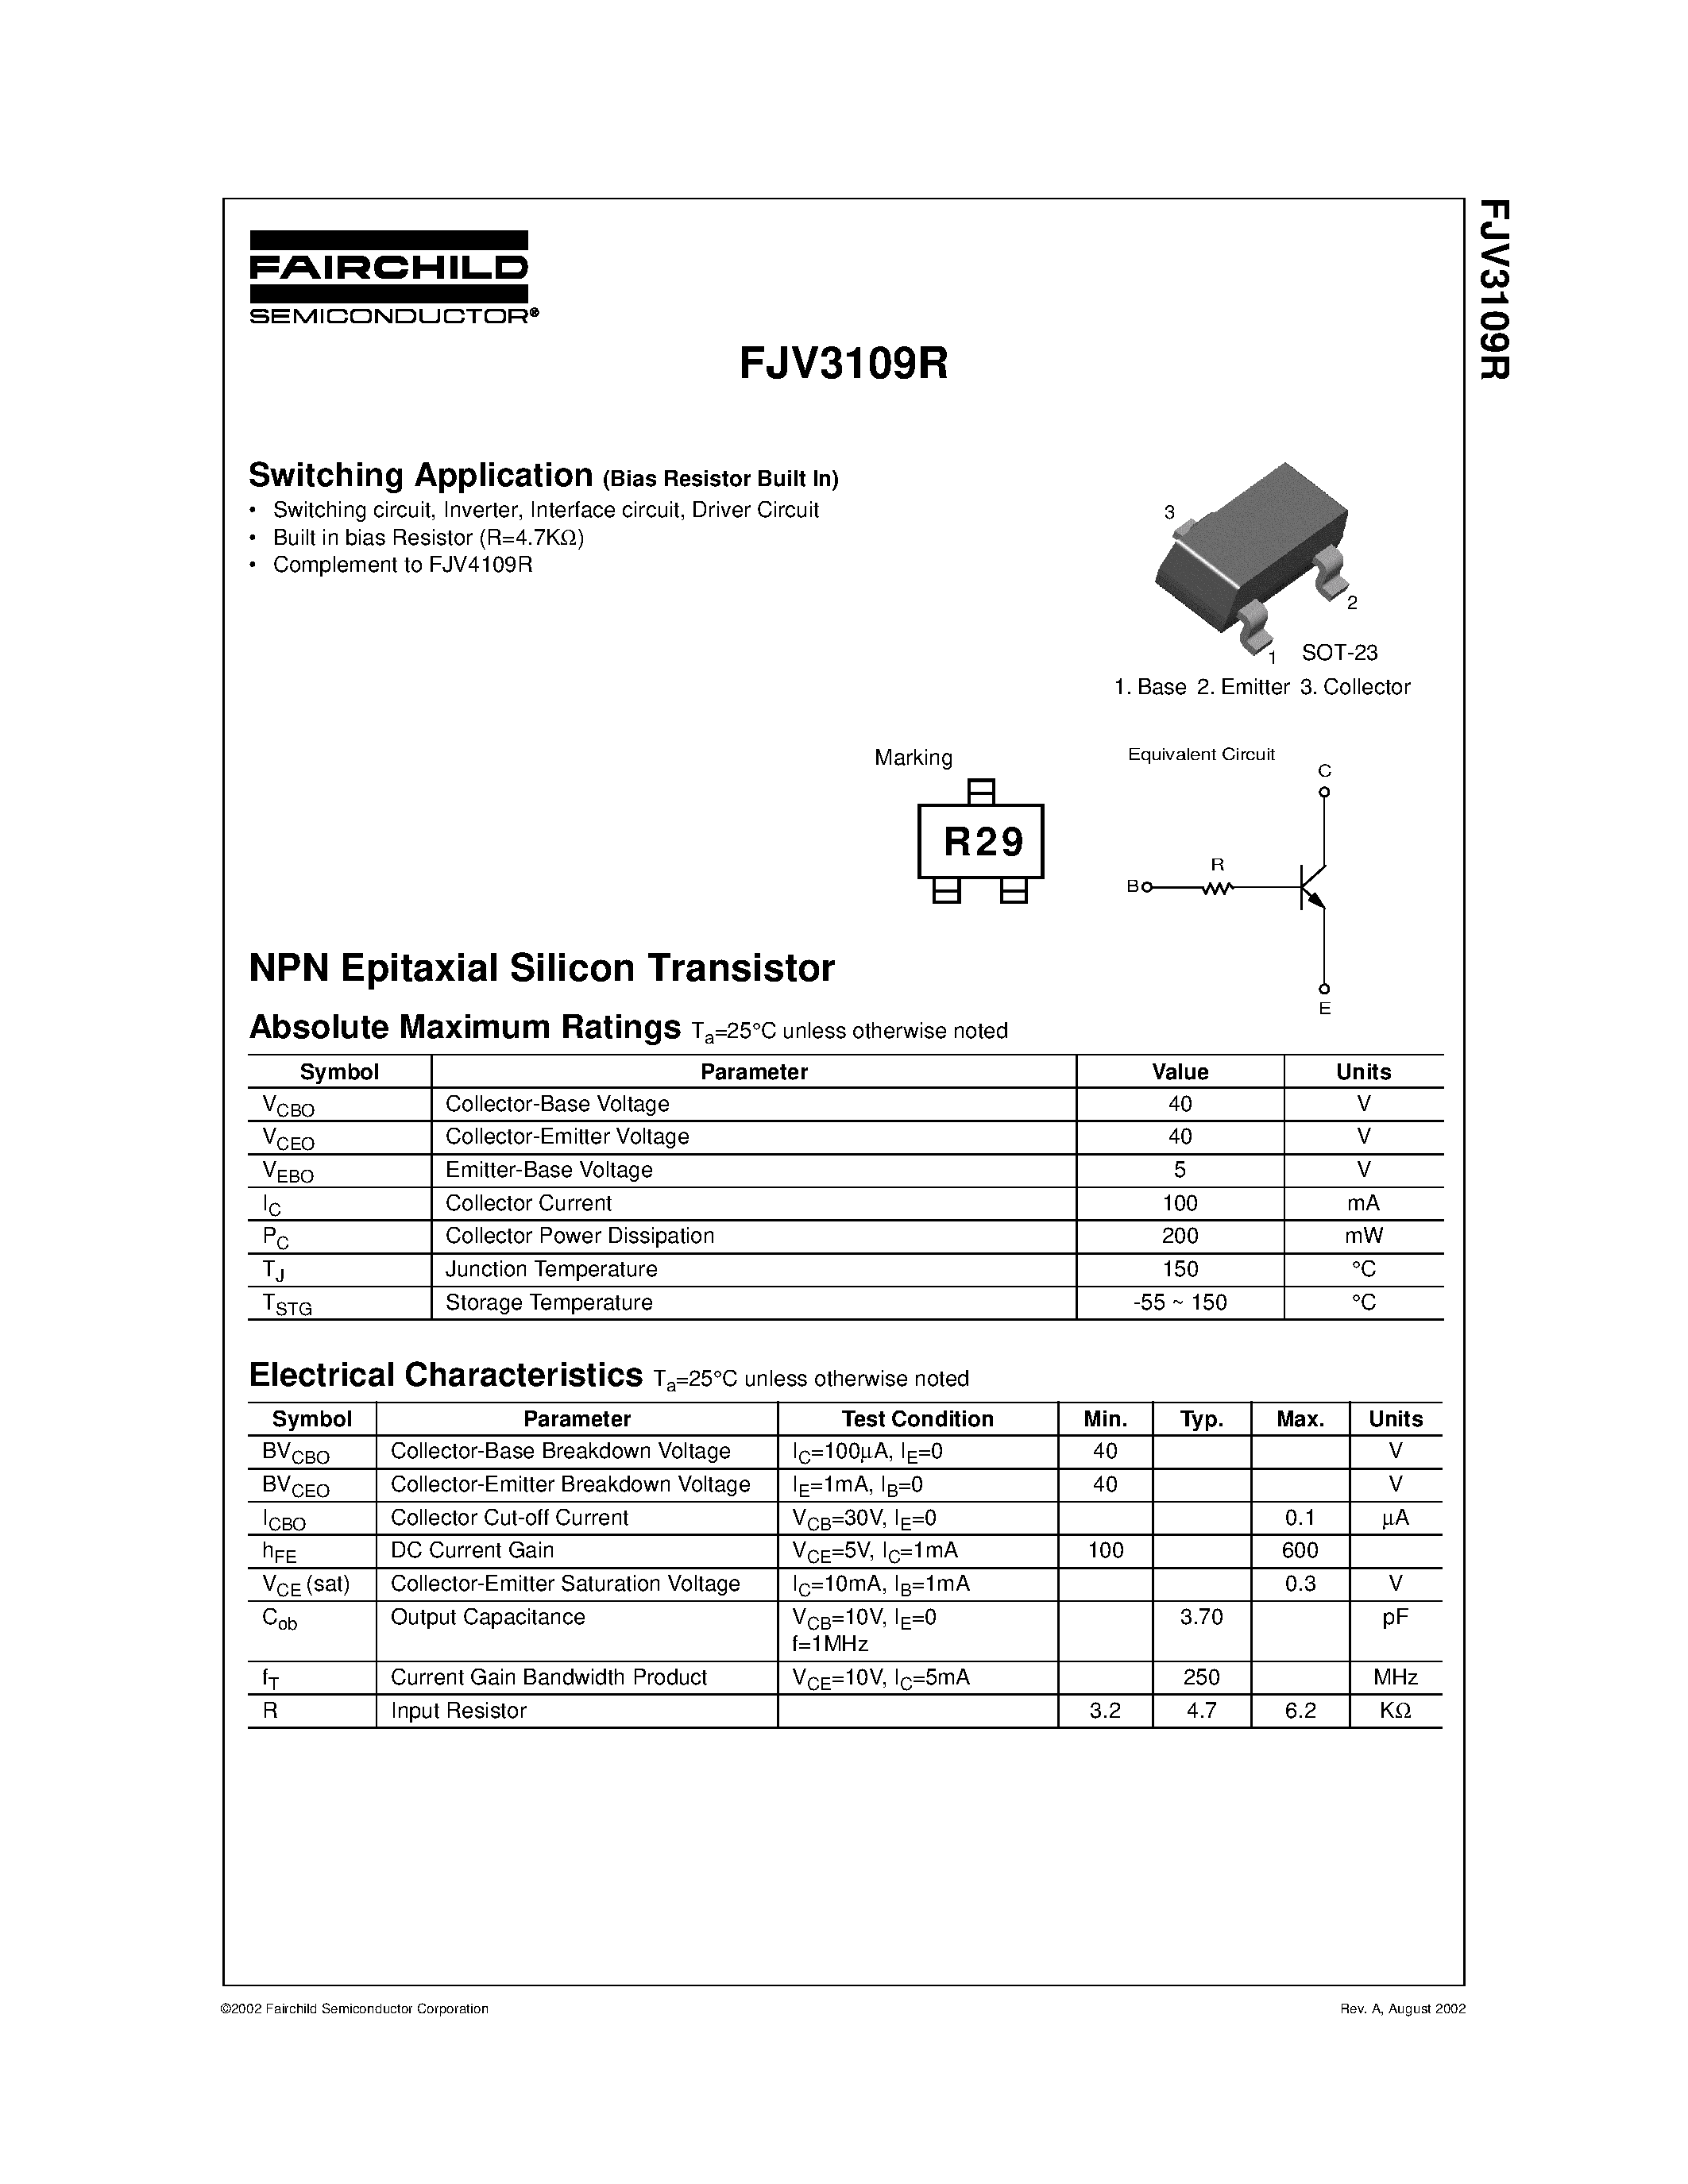 Даташит FJV3109R - NPN Epitaxial Silicon Transistor страница 1